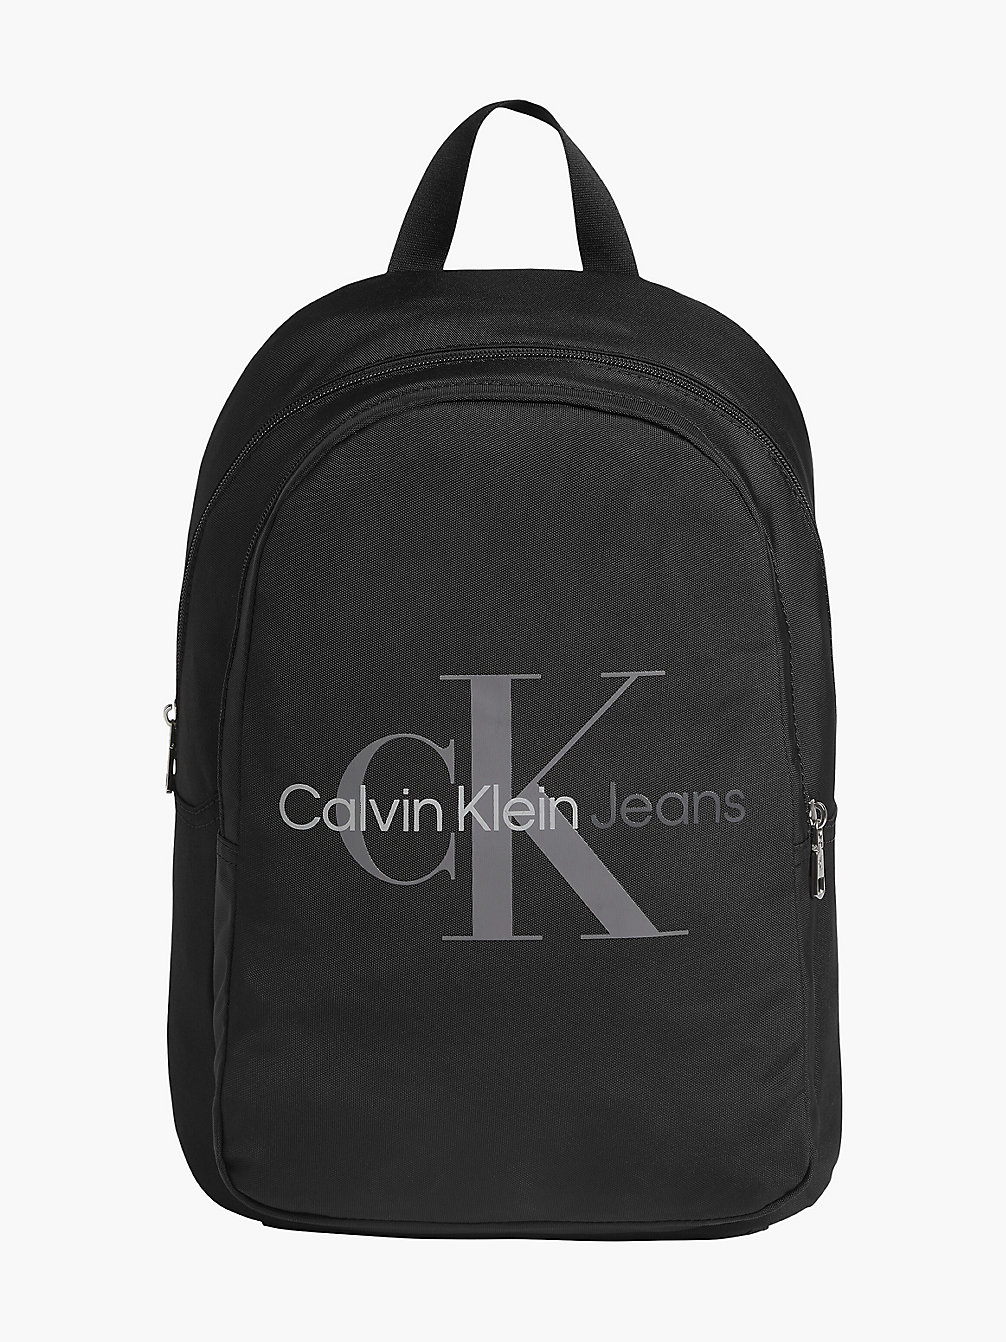 BLACK Recycled Polyester Round Backpack undefined men Calvin Klein